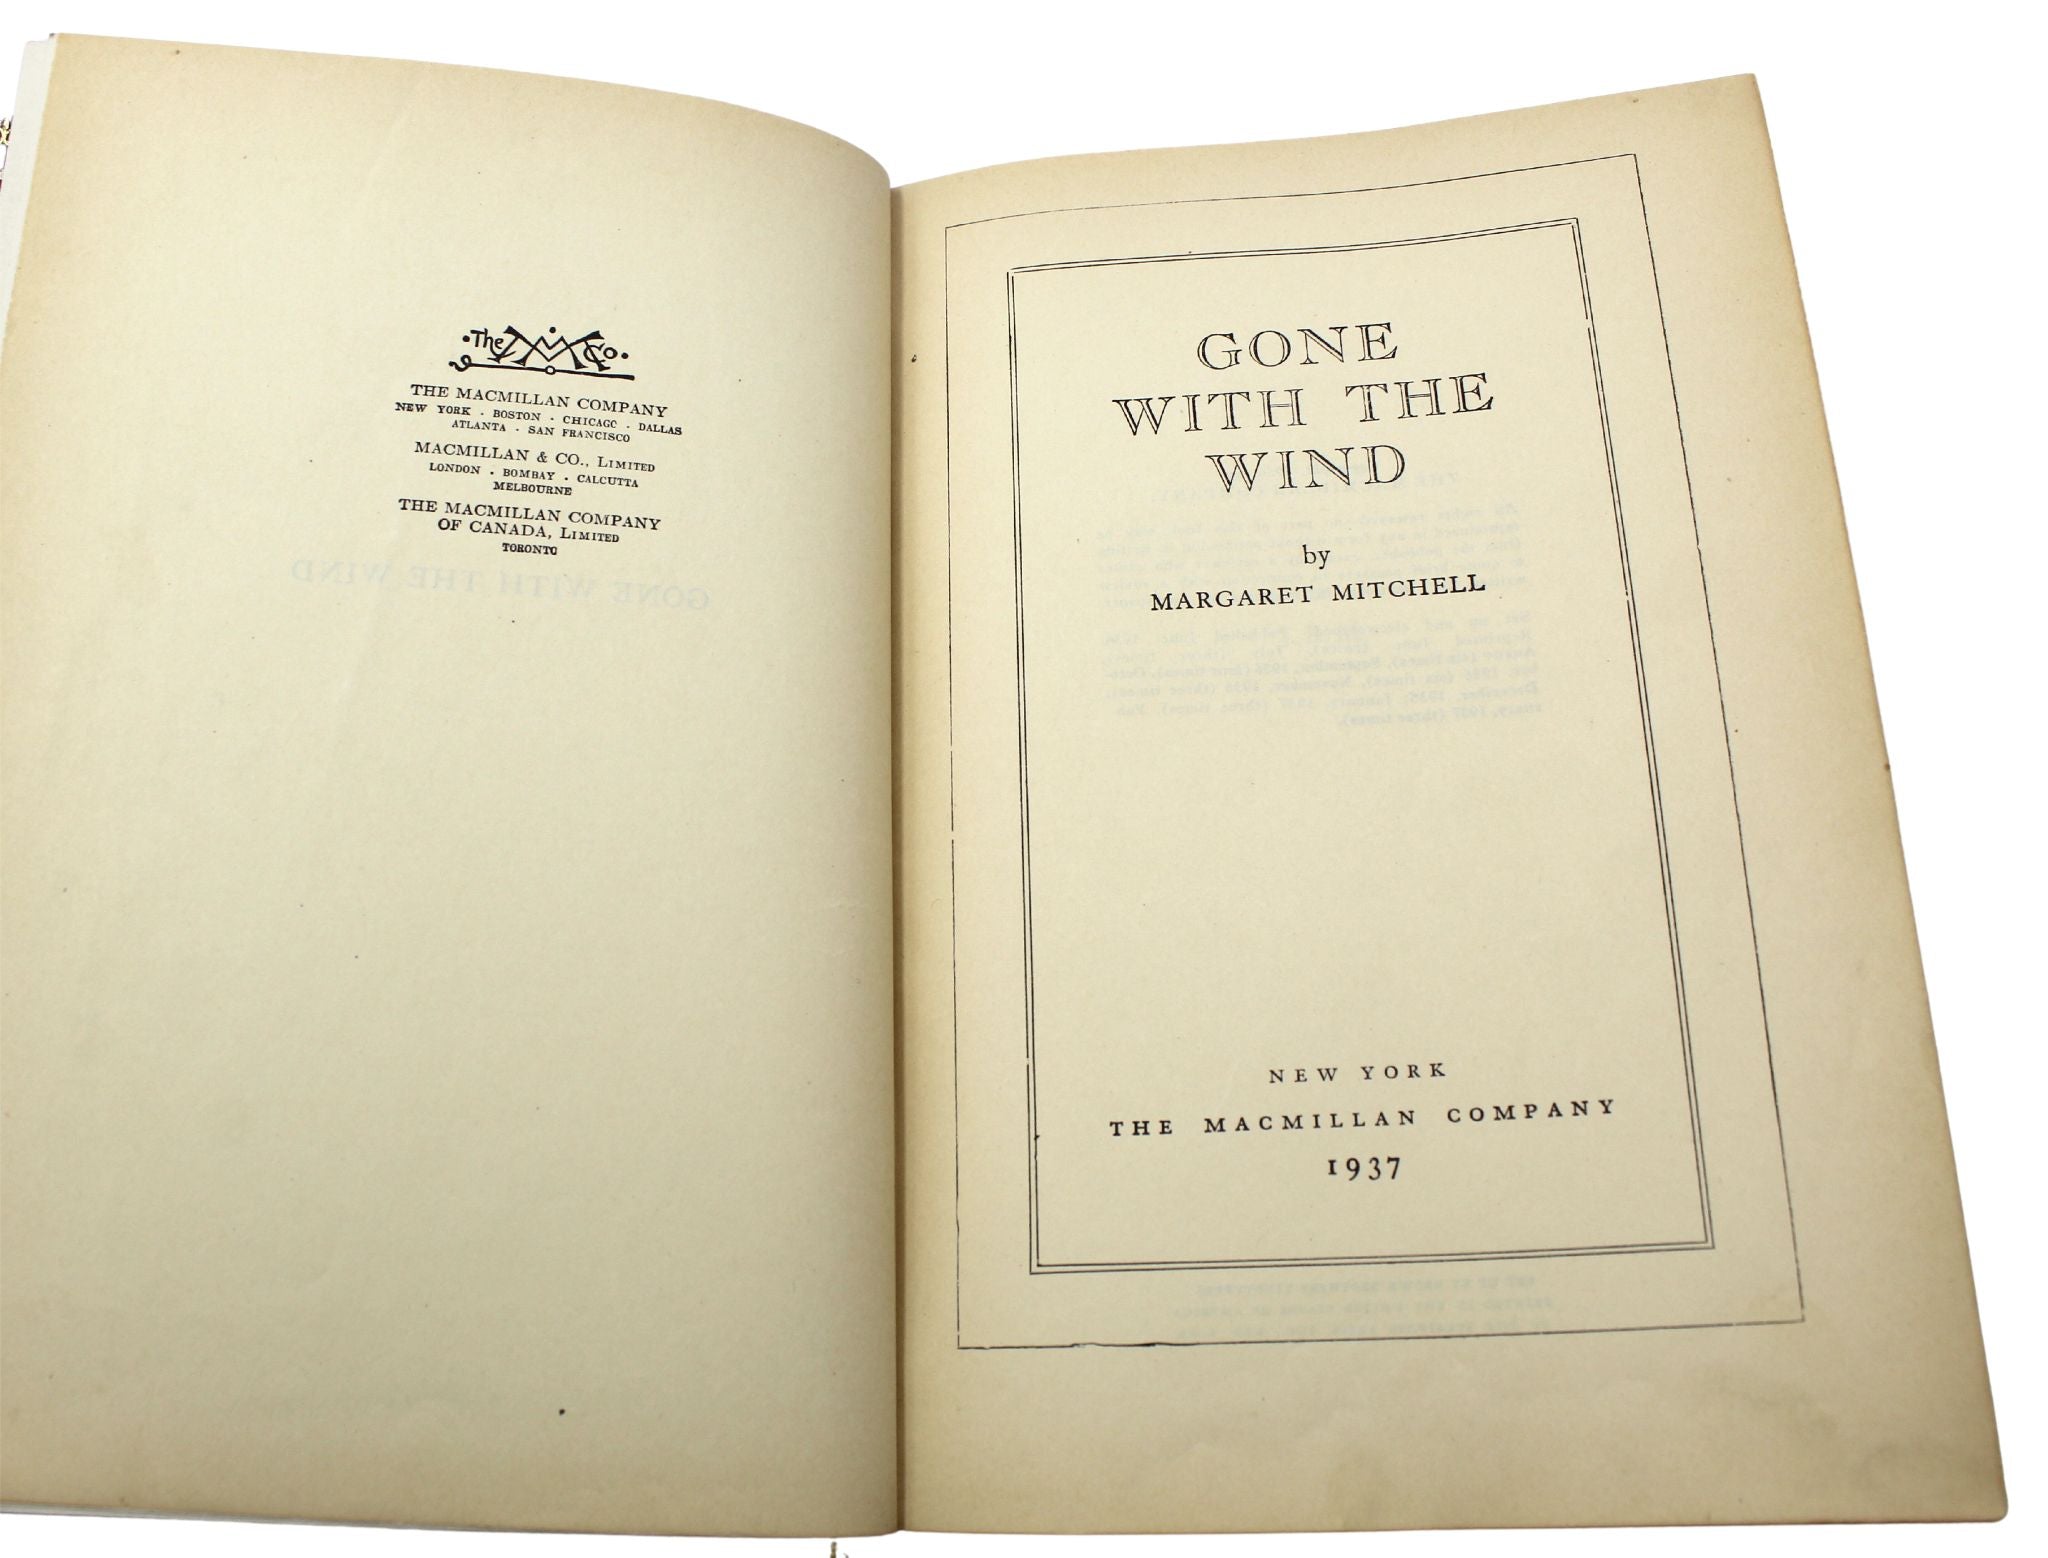 Gone With the Wind by Margaret Mitchell, First Edition, Later Printing, 1937 - The Great Republic